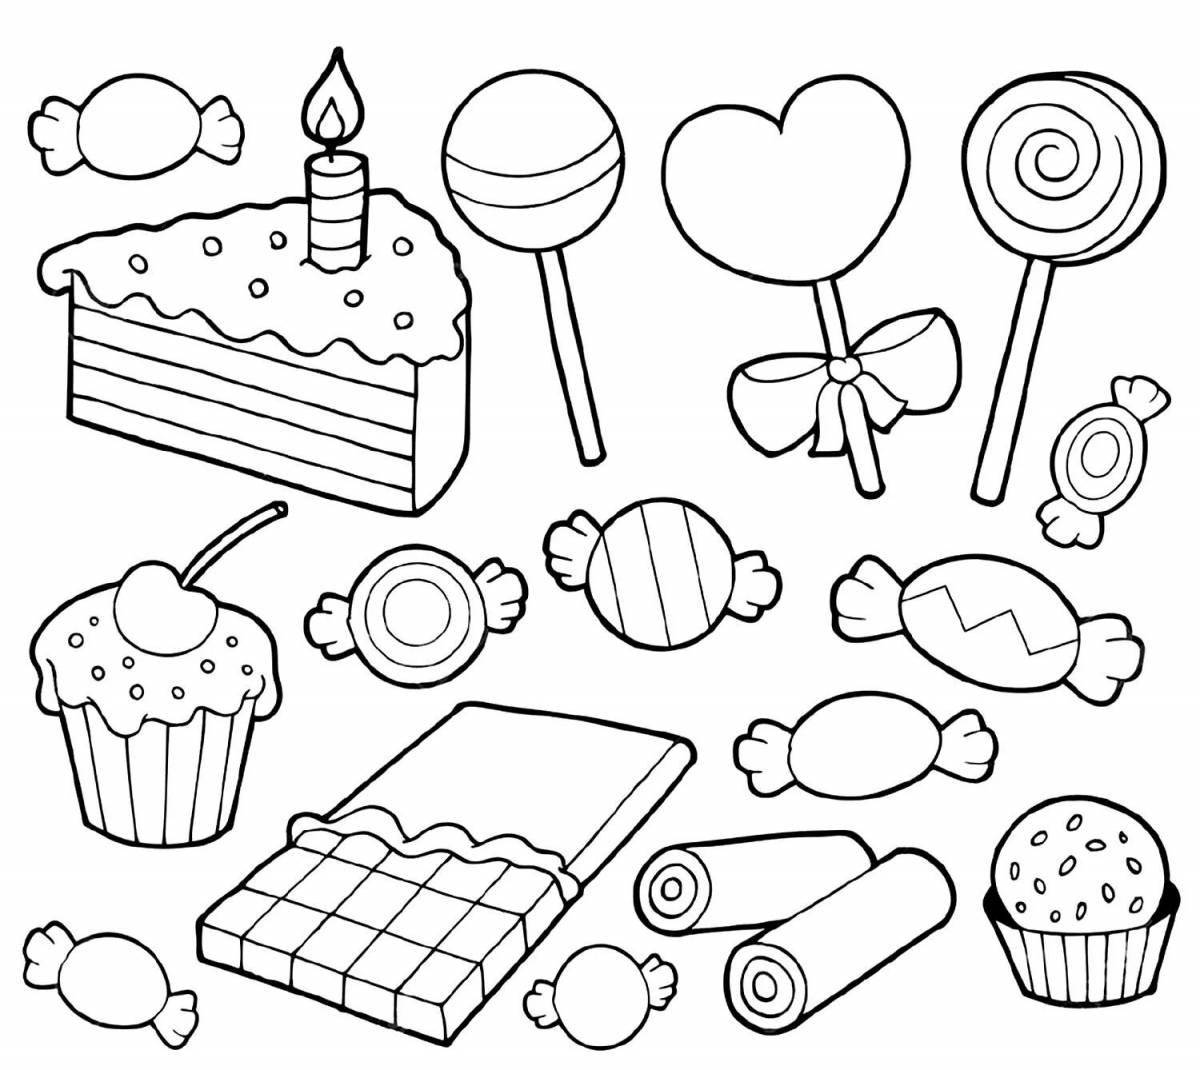 Color-bright cake pops coloring page